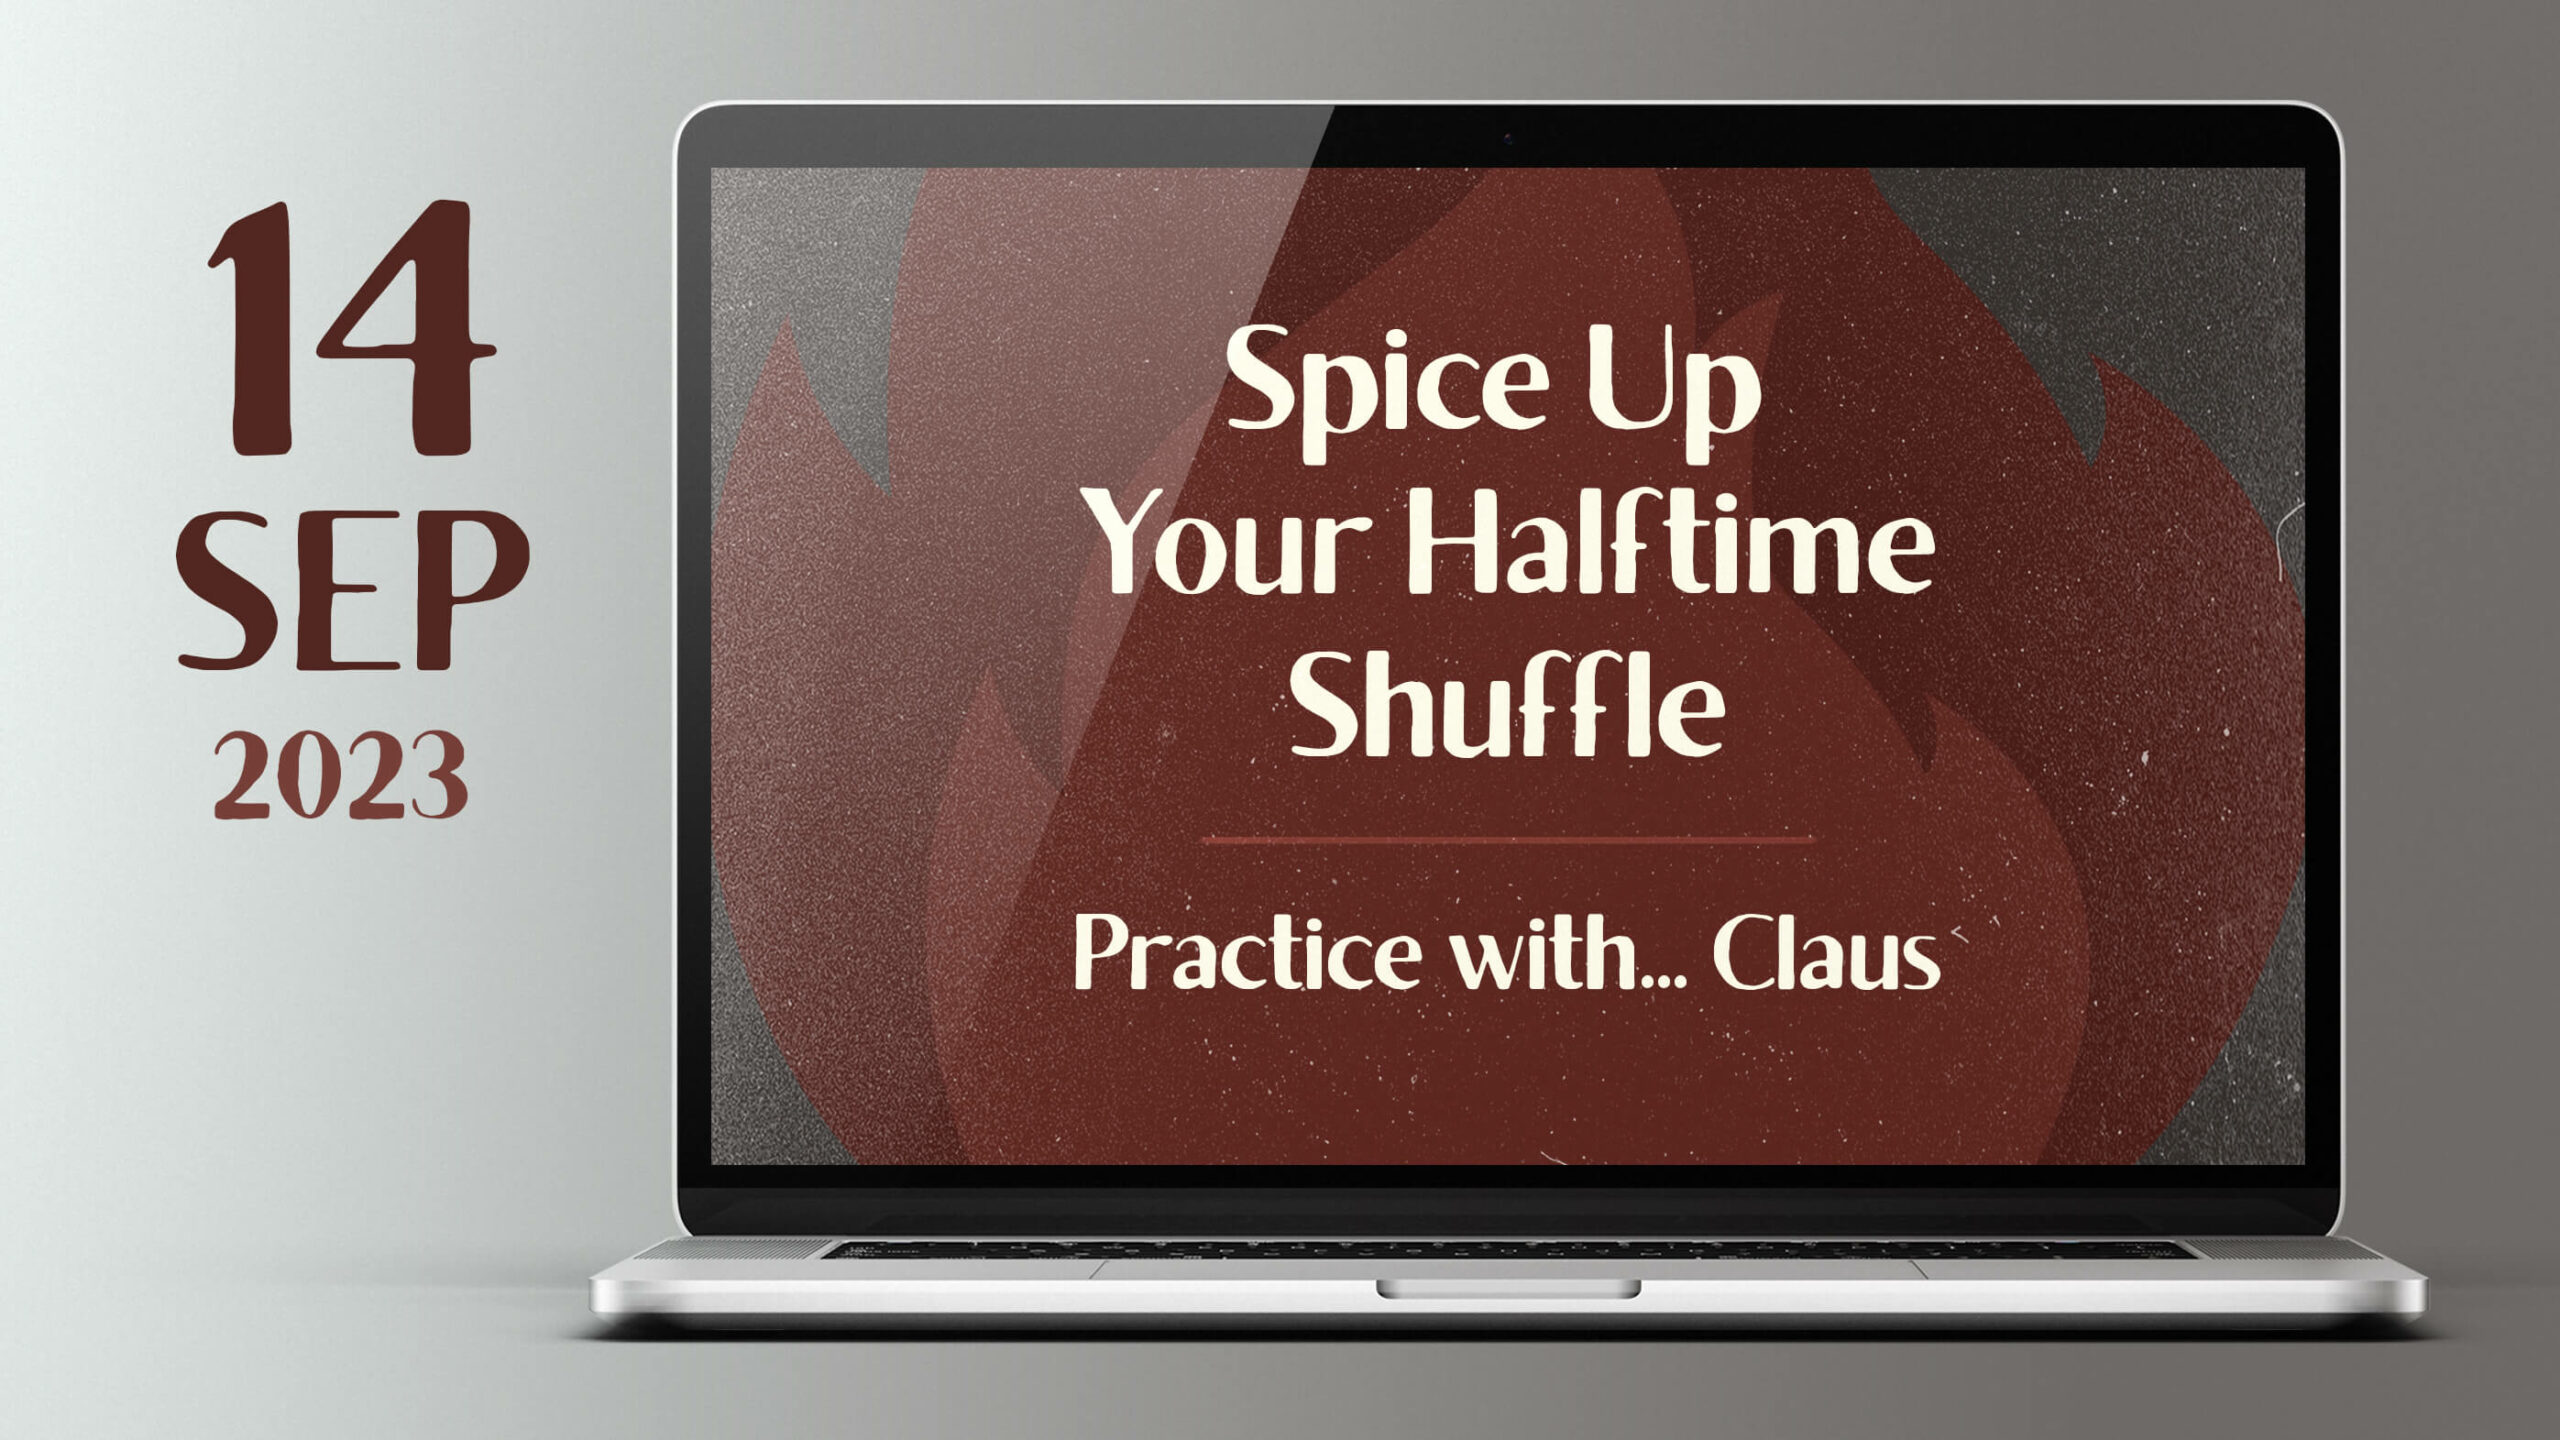 2023 09 14 spice up your halftime shuffle scaled